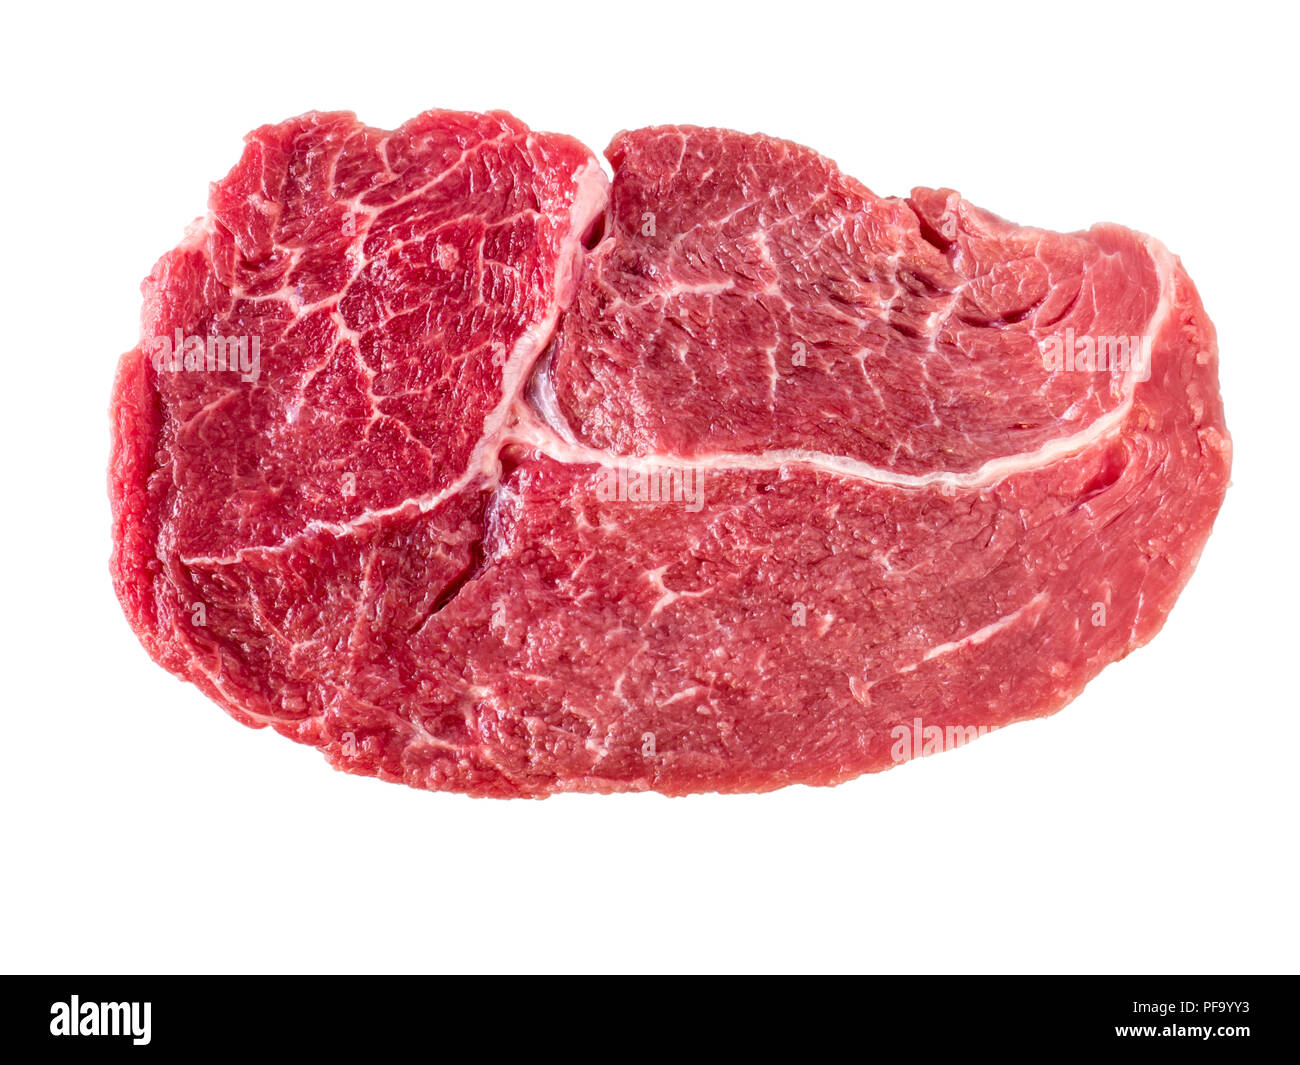 Beef fillet slice isolated on white Stock Photo